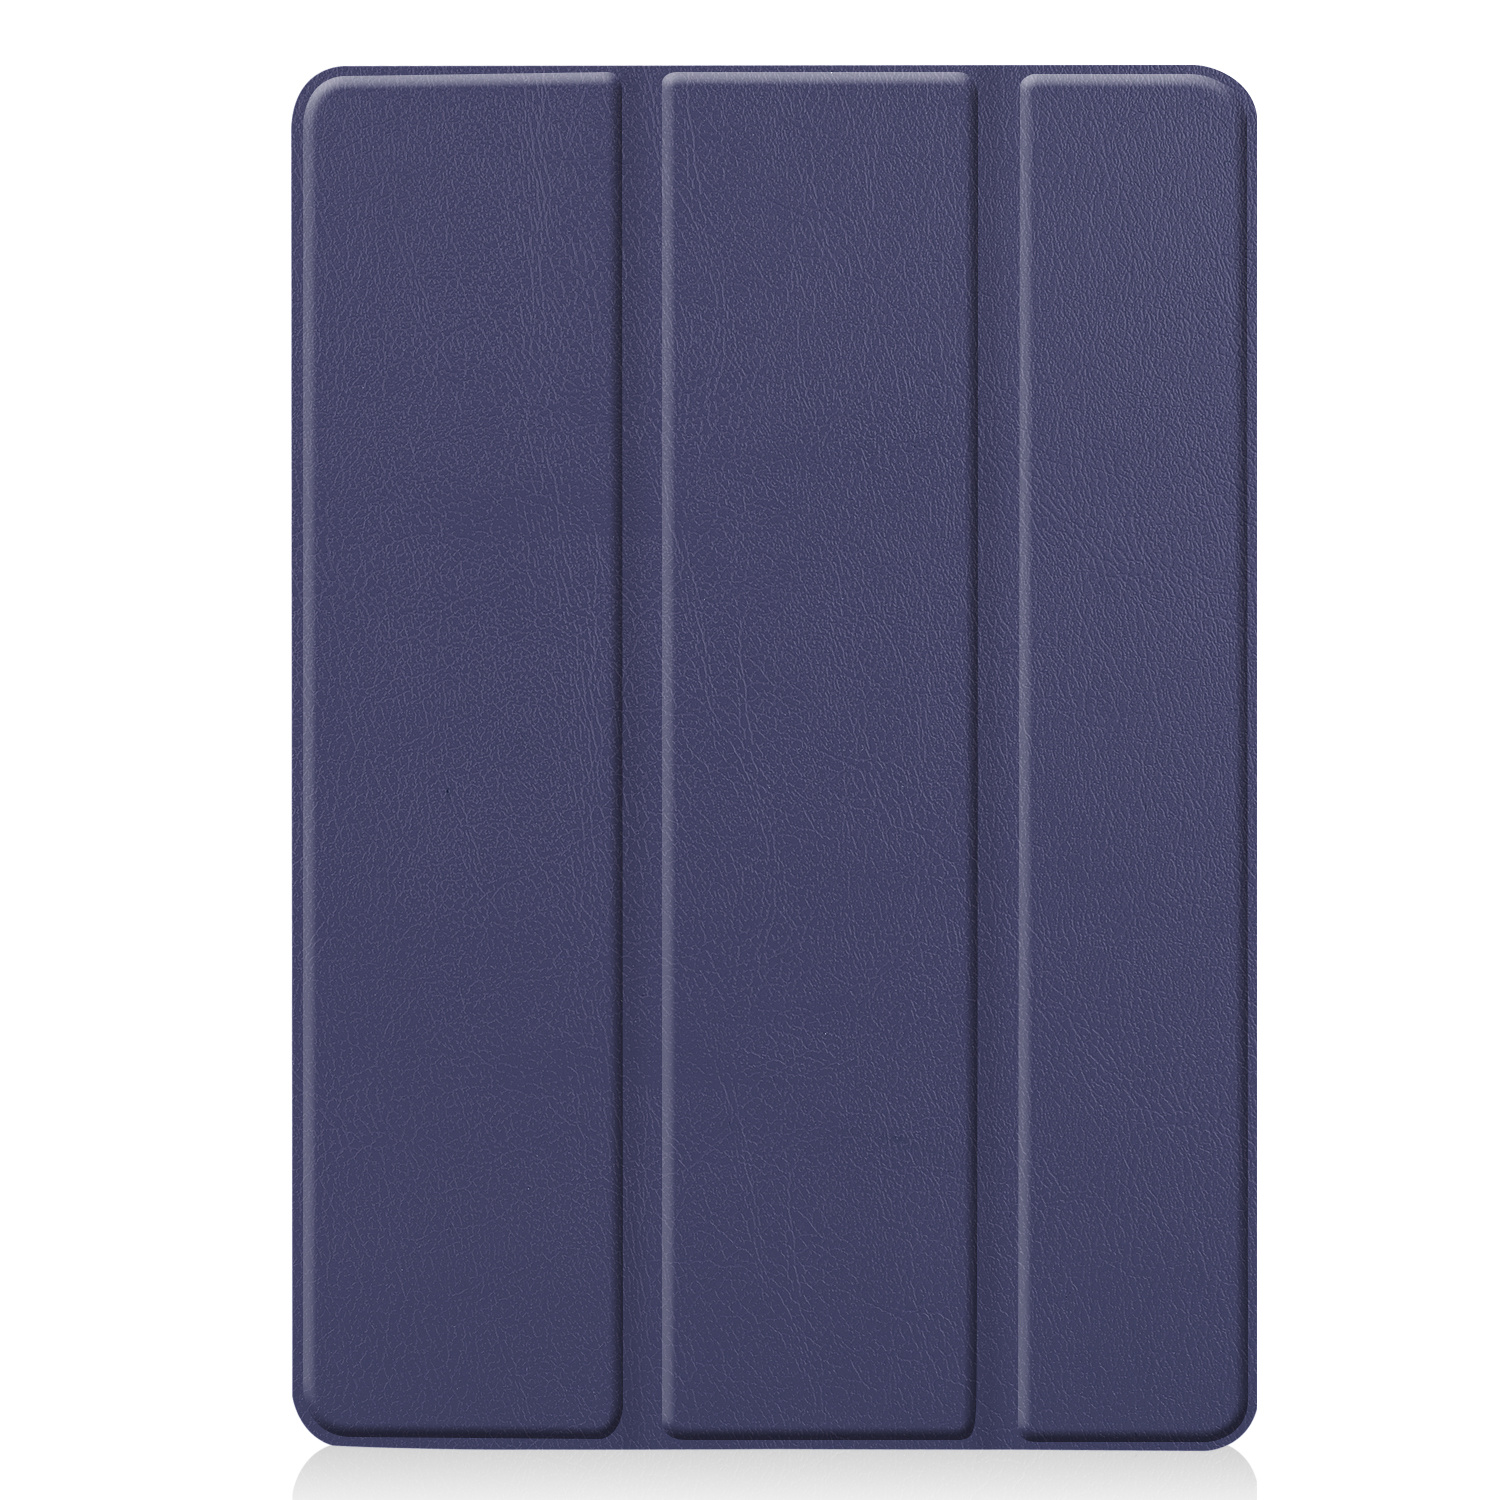 Nomfy iPad 10.2 2020 Hoesje Book Case Hoes - iPad 10.2 2020 Hoes Hardcover Case Hoesje - Donker Blauw